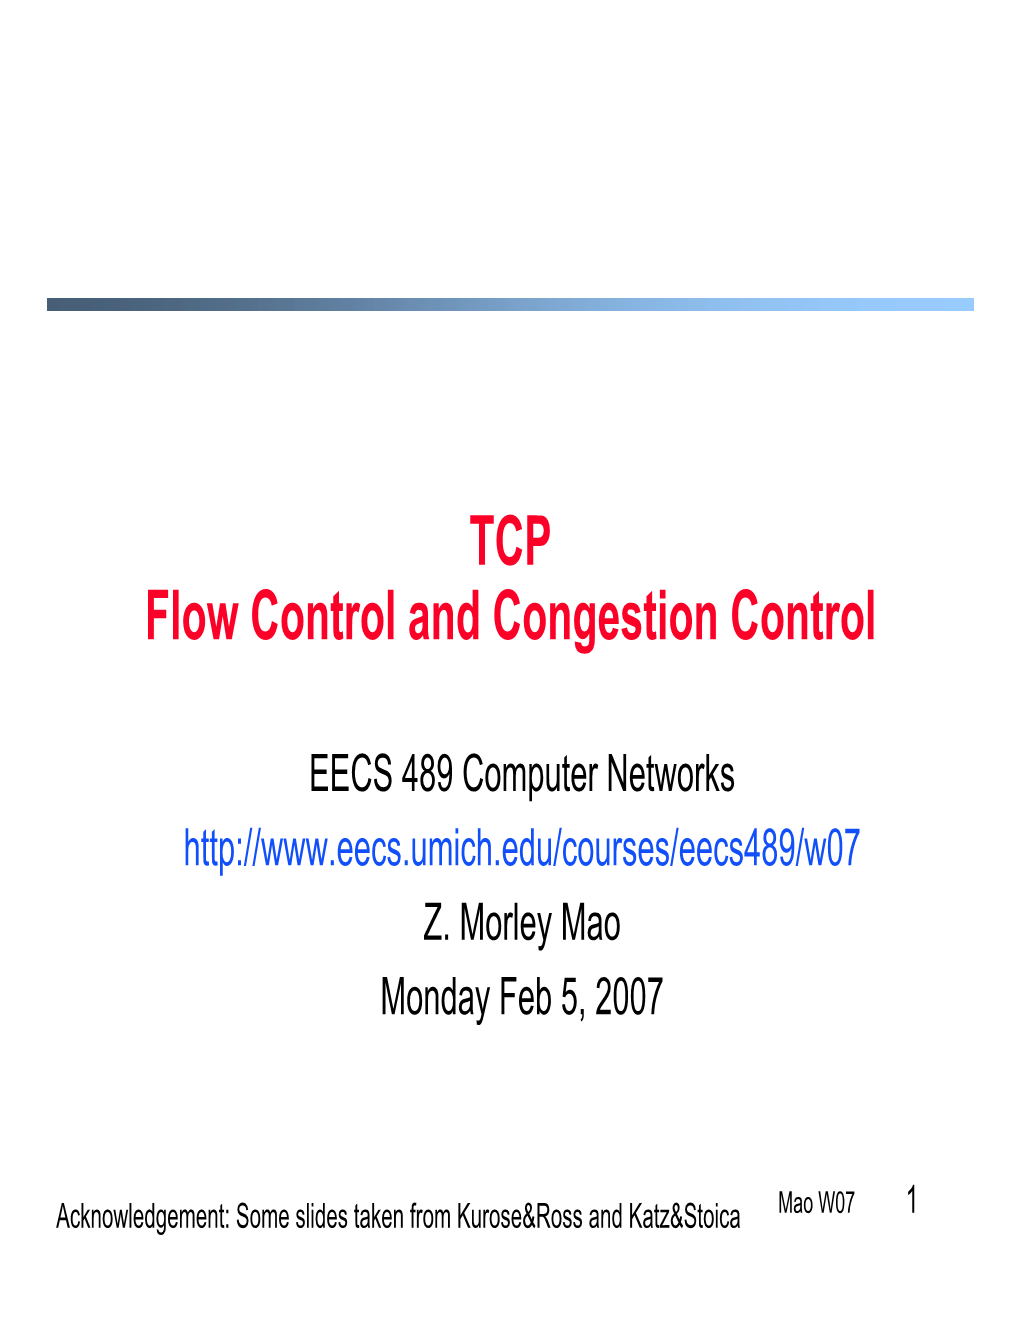 TCP Flow Control and Congestion Control